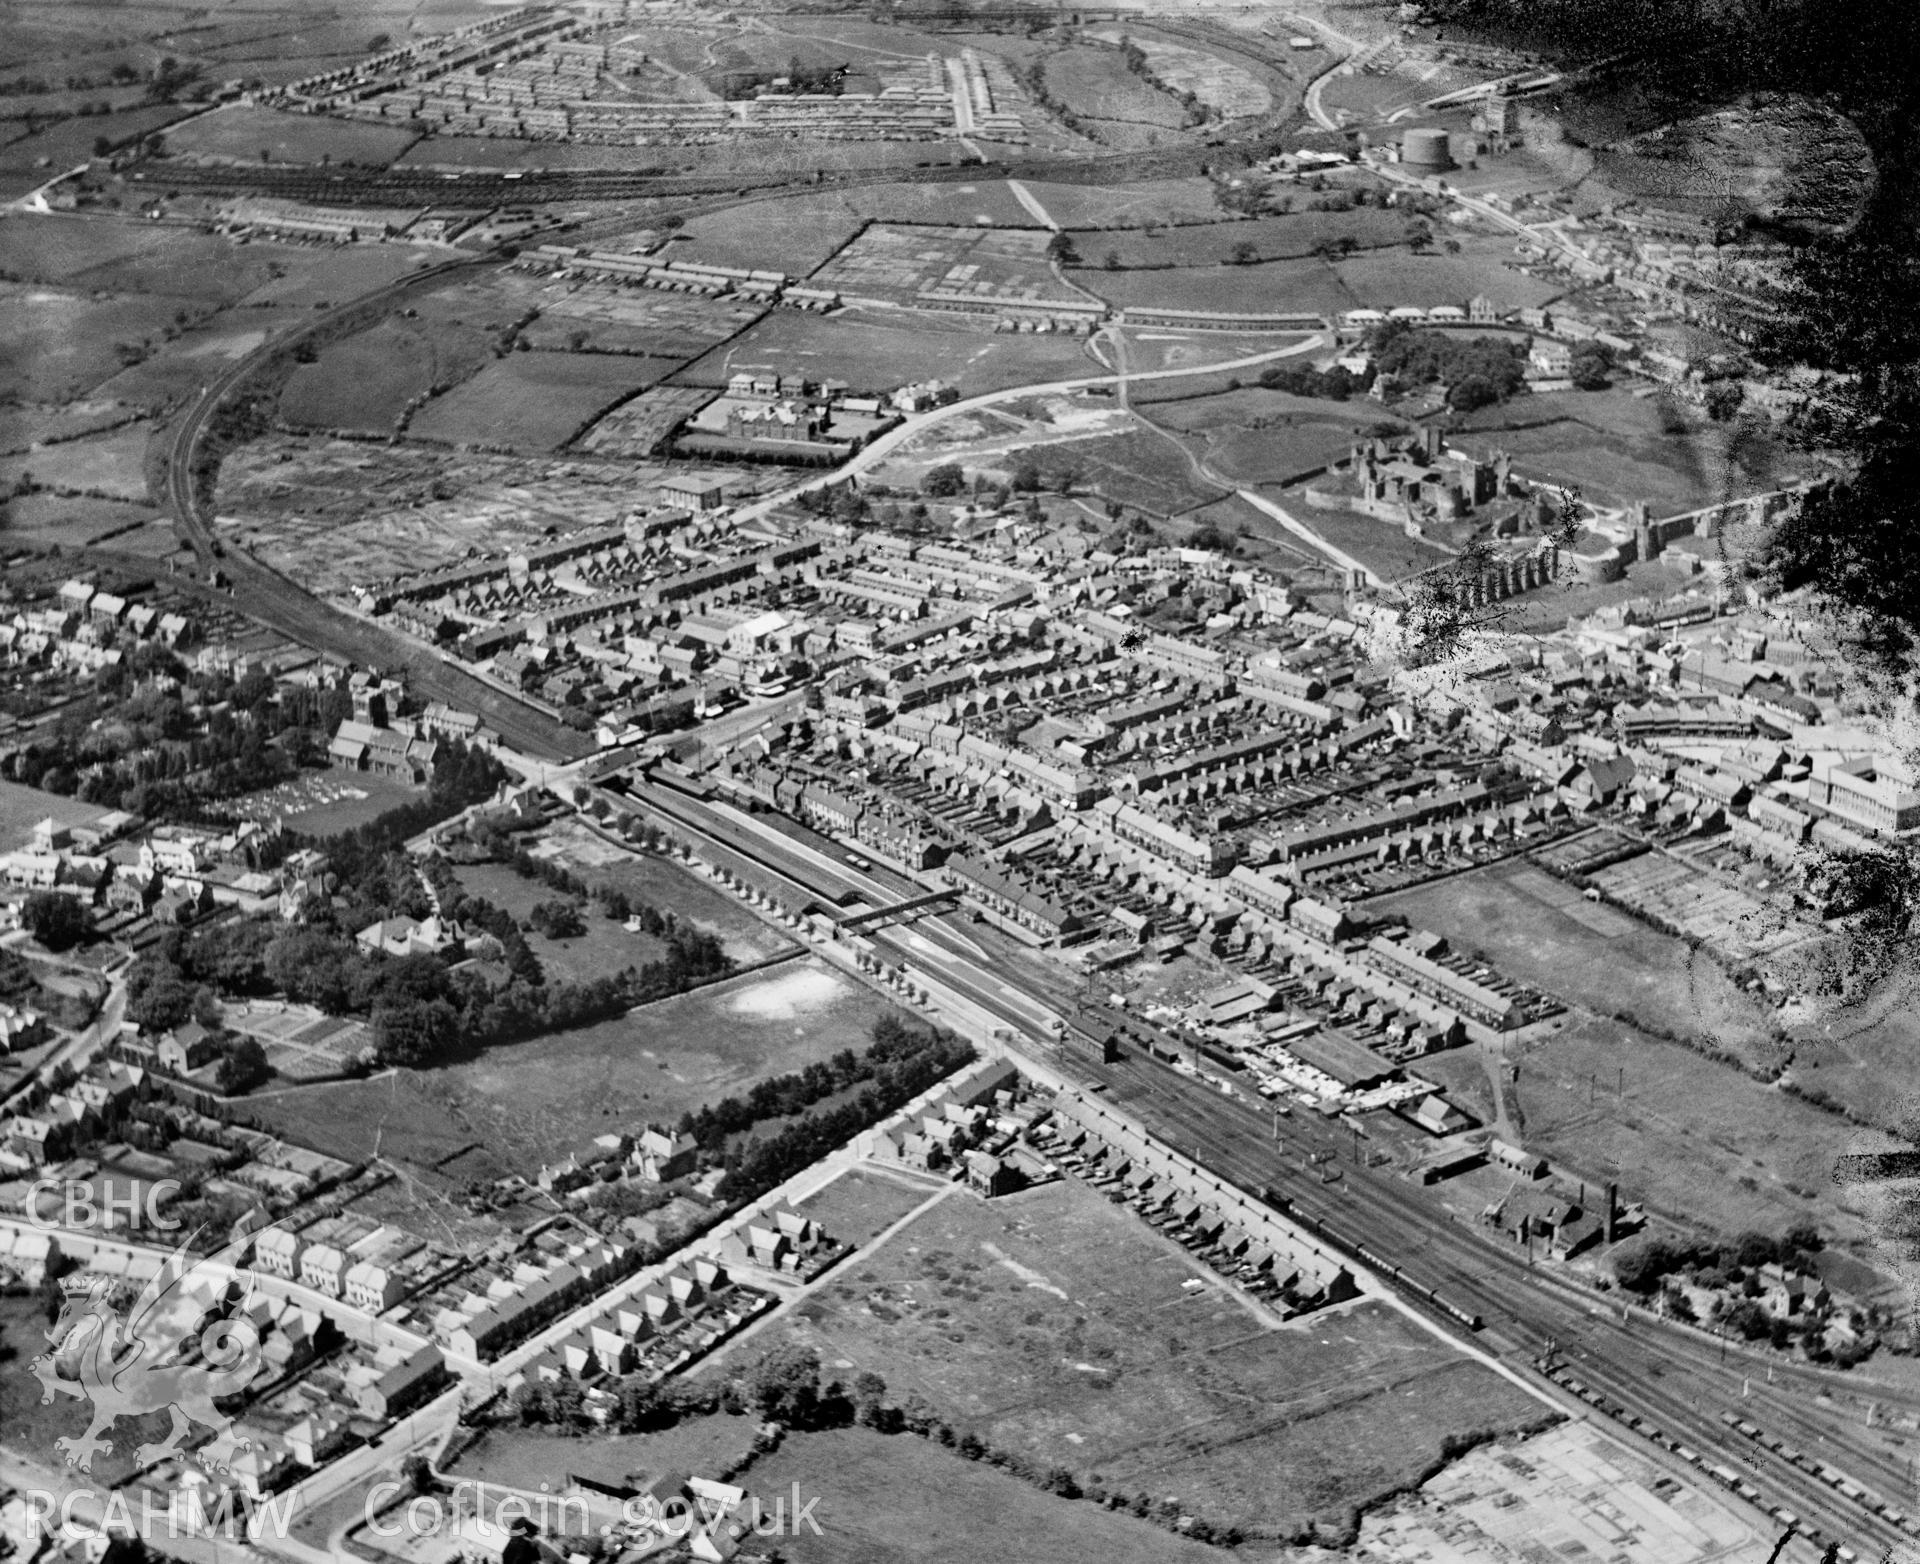 General view of Caerphilly, oblique aerial view. 5?x4? black and white glass plate negative.